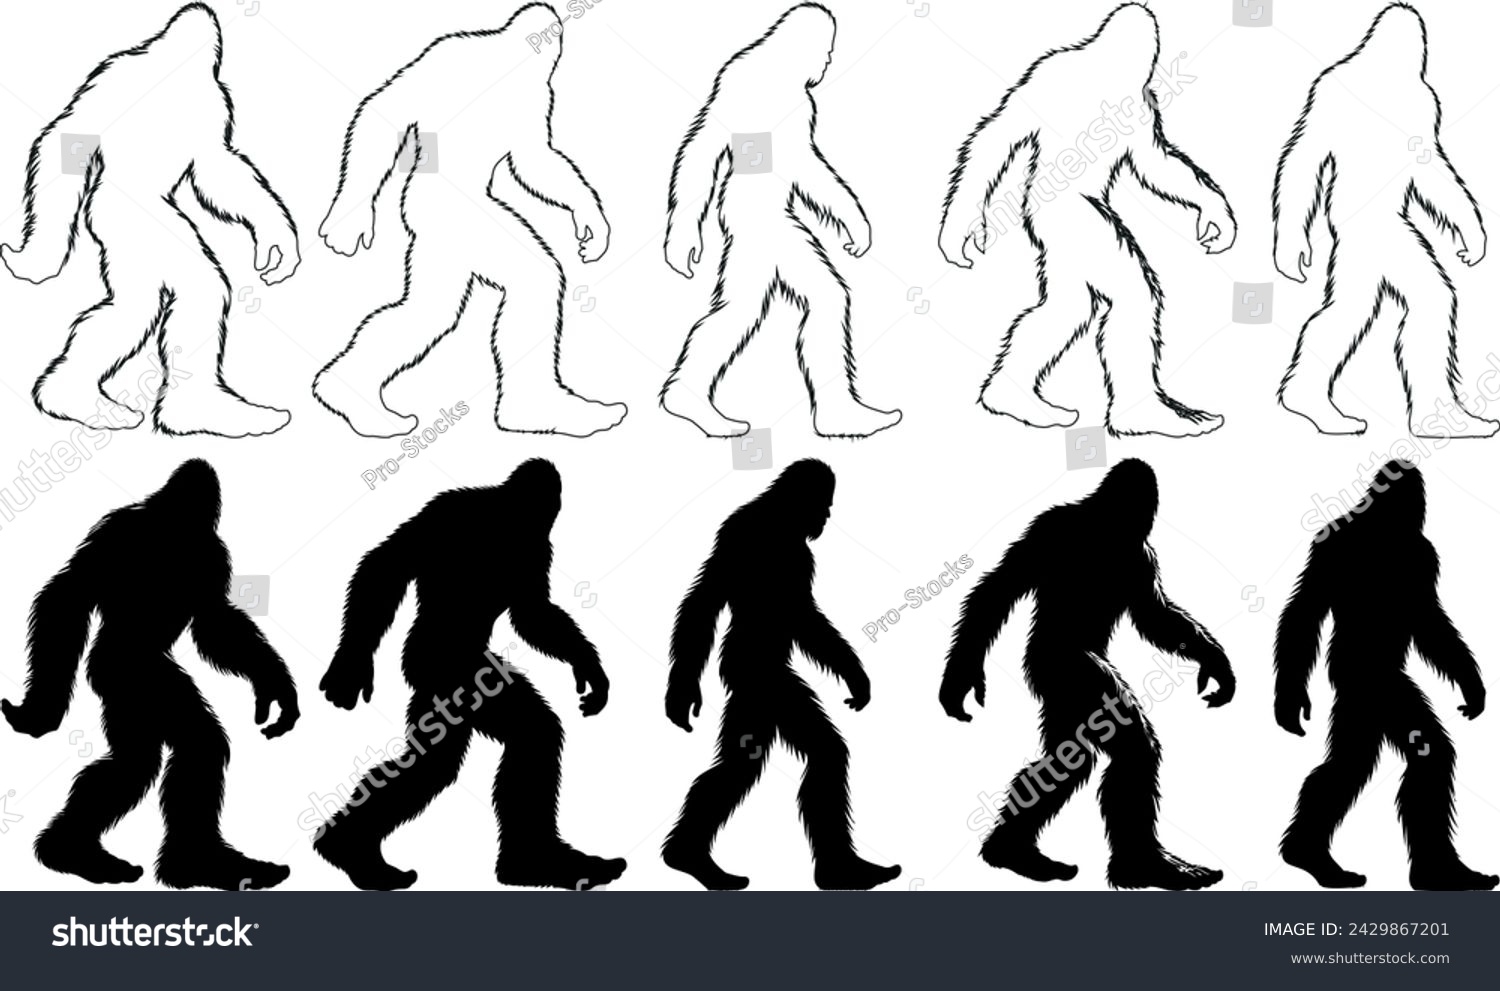 SVG of Bigfoot silhouette mythical creature, vector illustration. Black and white silhouettes, bigfoot walking pose. Perfect for cryptology, mystery, folklore content svg